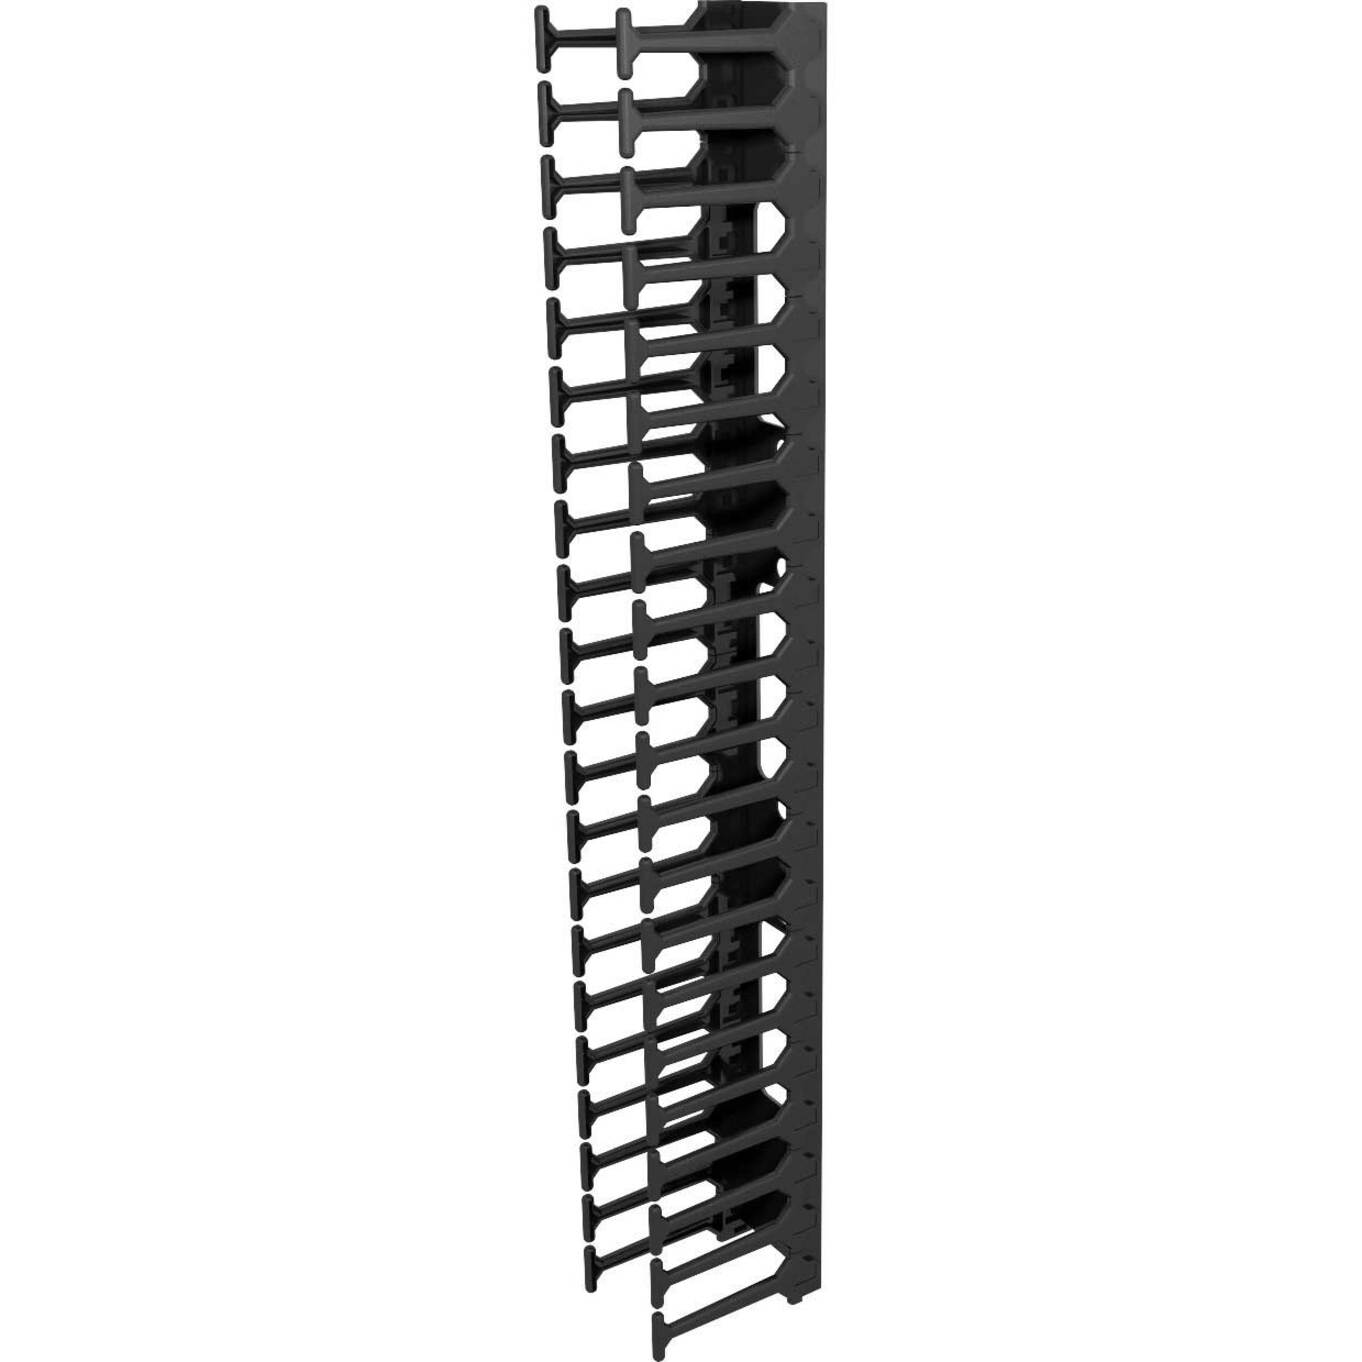 VERTIV VRA1016 Vertiv Vertical Cable Wire Organizer with finger slots - 42U| 800mm, Cable Management Panel